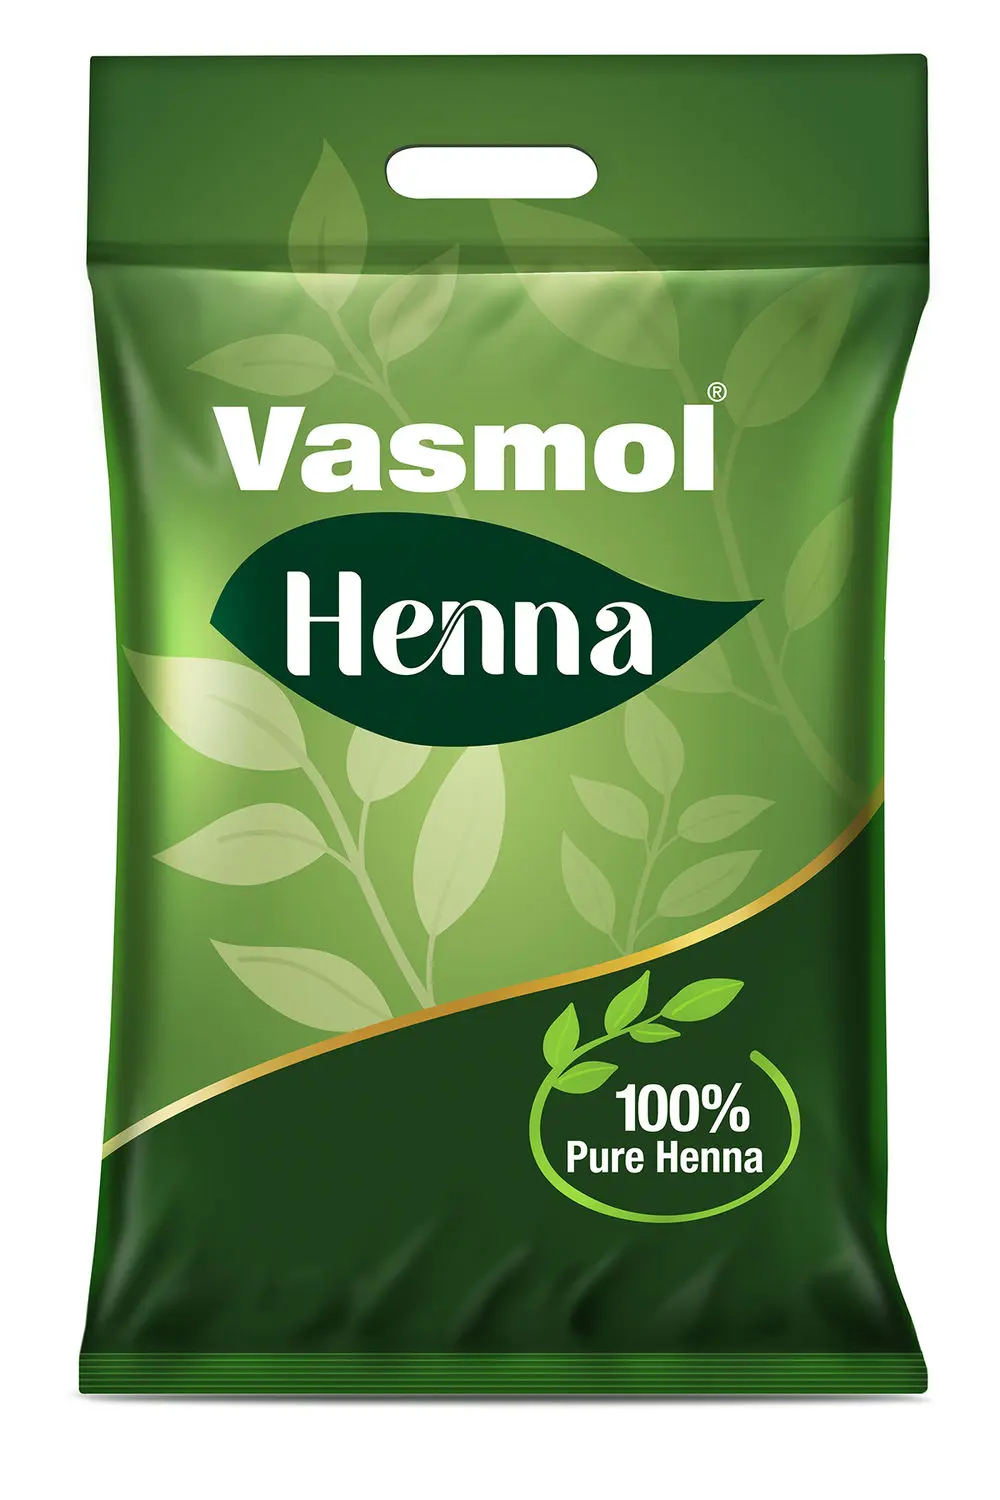 Vasmol Henna 100% Pure Henna Powder (Mehendi) I For Grey Hair Coverage, Hair Conditioning & Nourishment I For Mehndi designs on Hands and Feet I For Hair Colour I Suitable for Men and Women - 500 gms